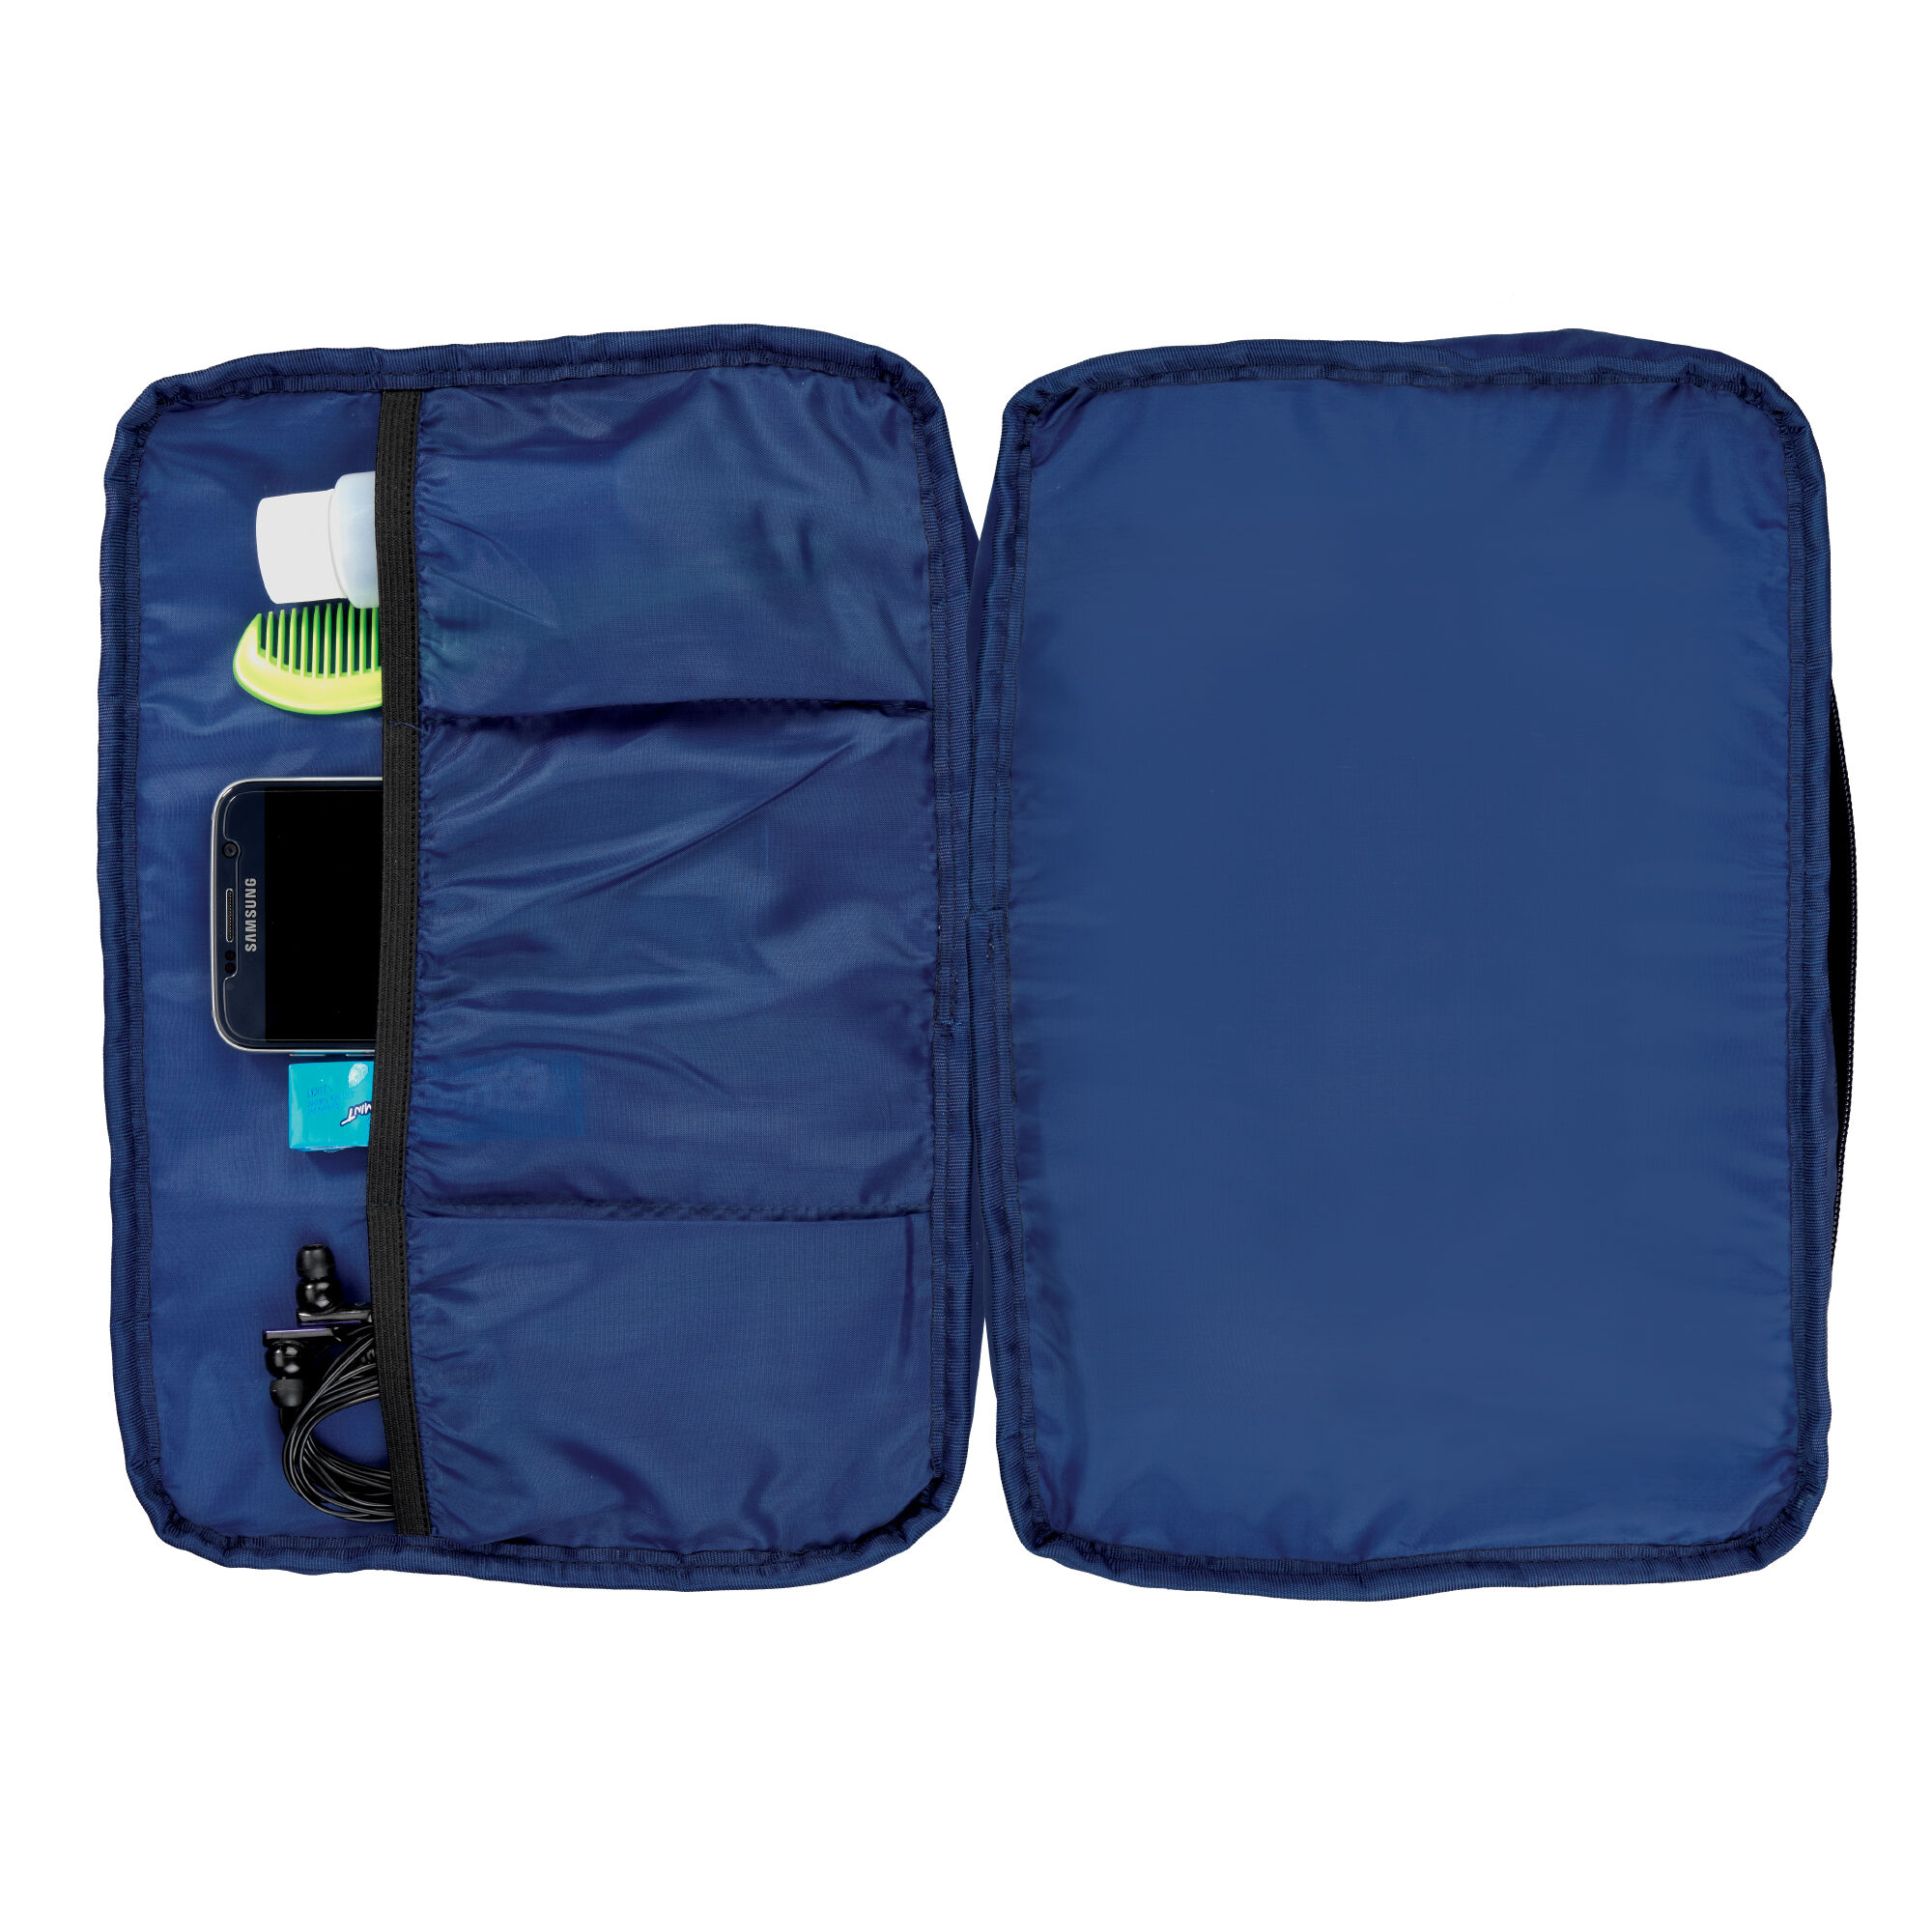 The Personalized Travel Set 5164 002 d inside